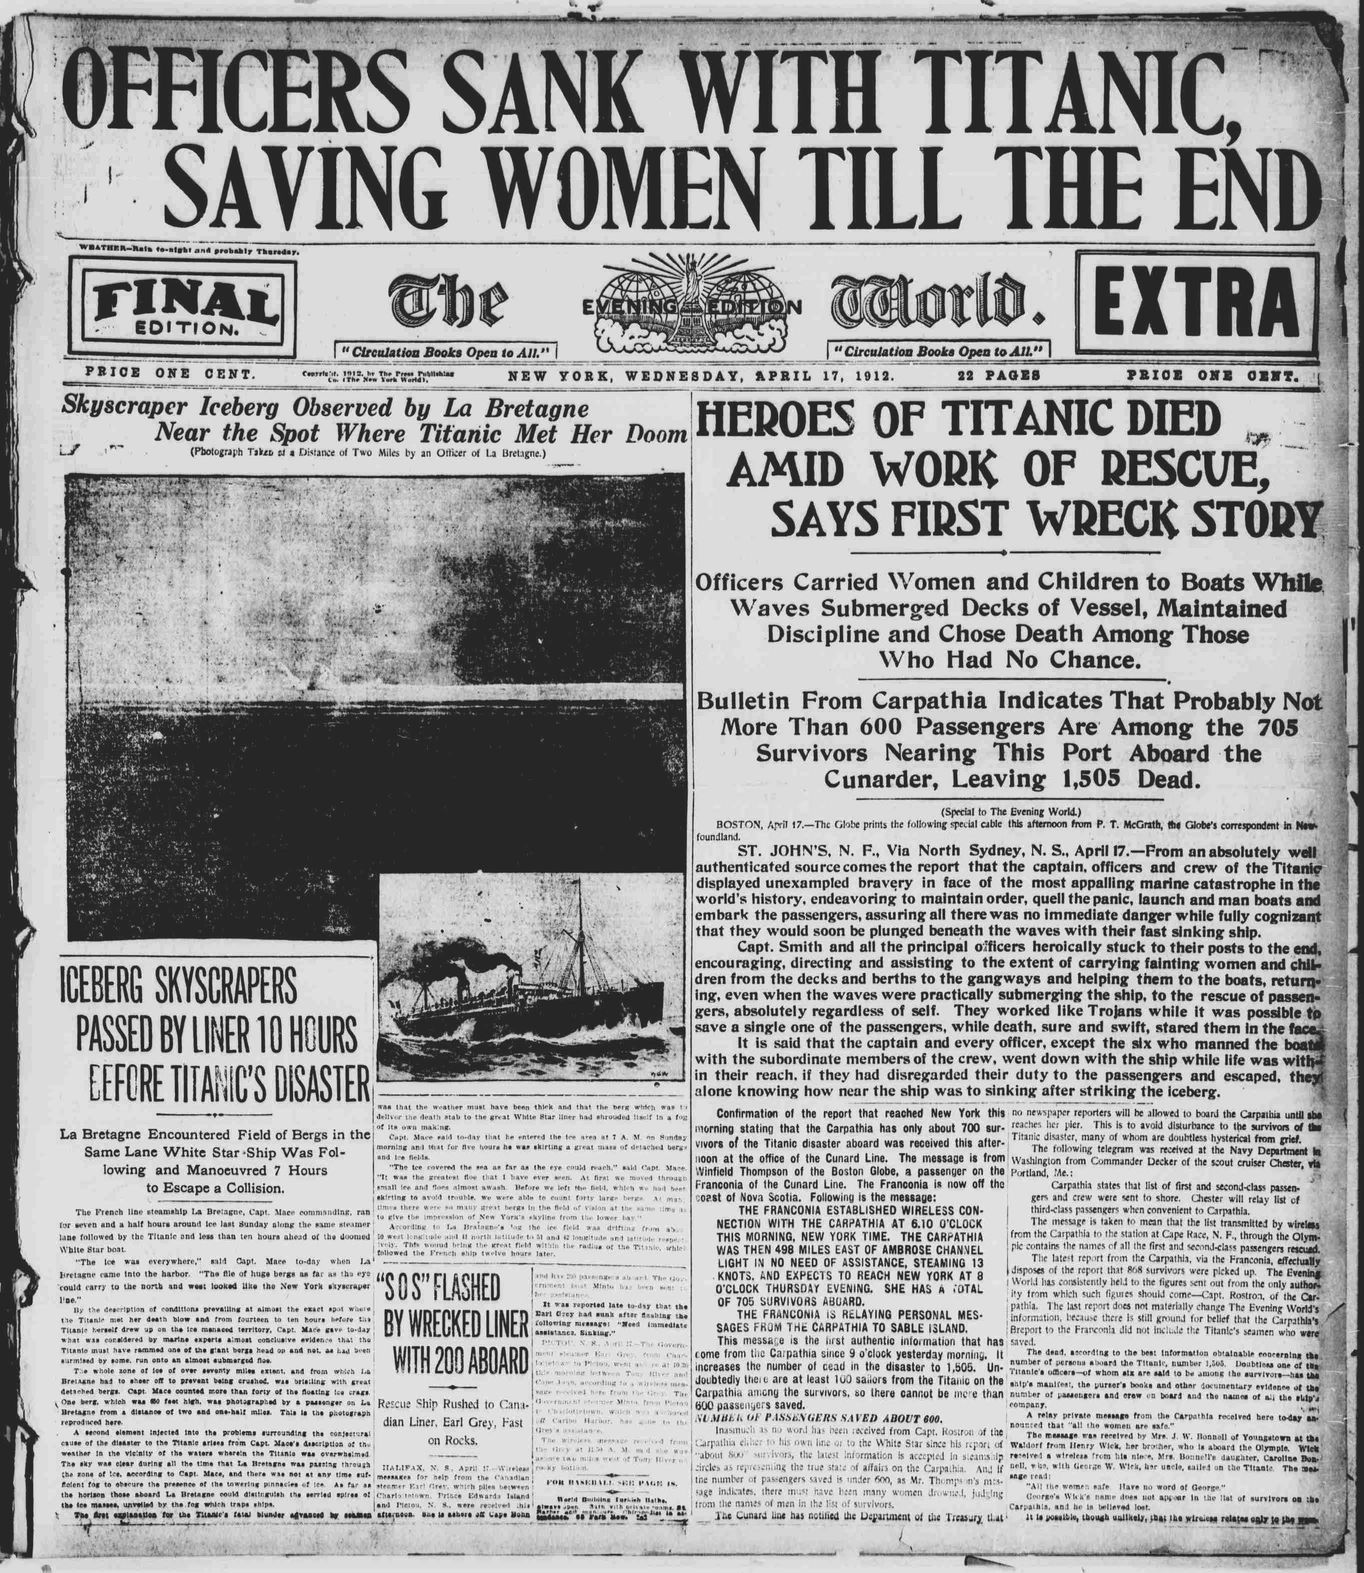 Titanic Newspaper Front Page 1912-04-17 The Evening World (New York, NY), April 17, 1912, Final Edition-Extra, Page 1